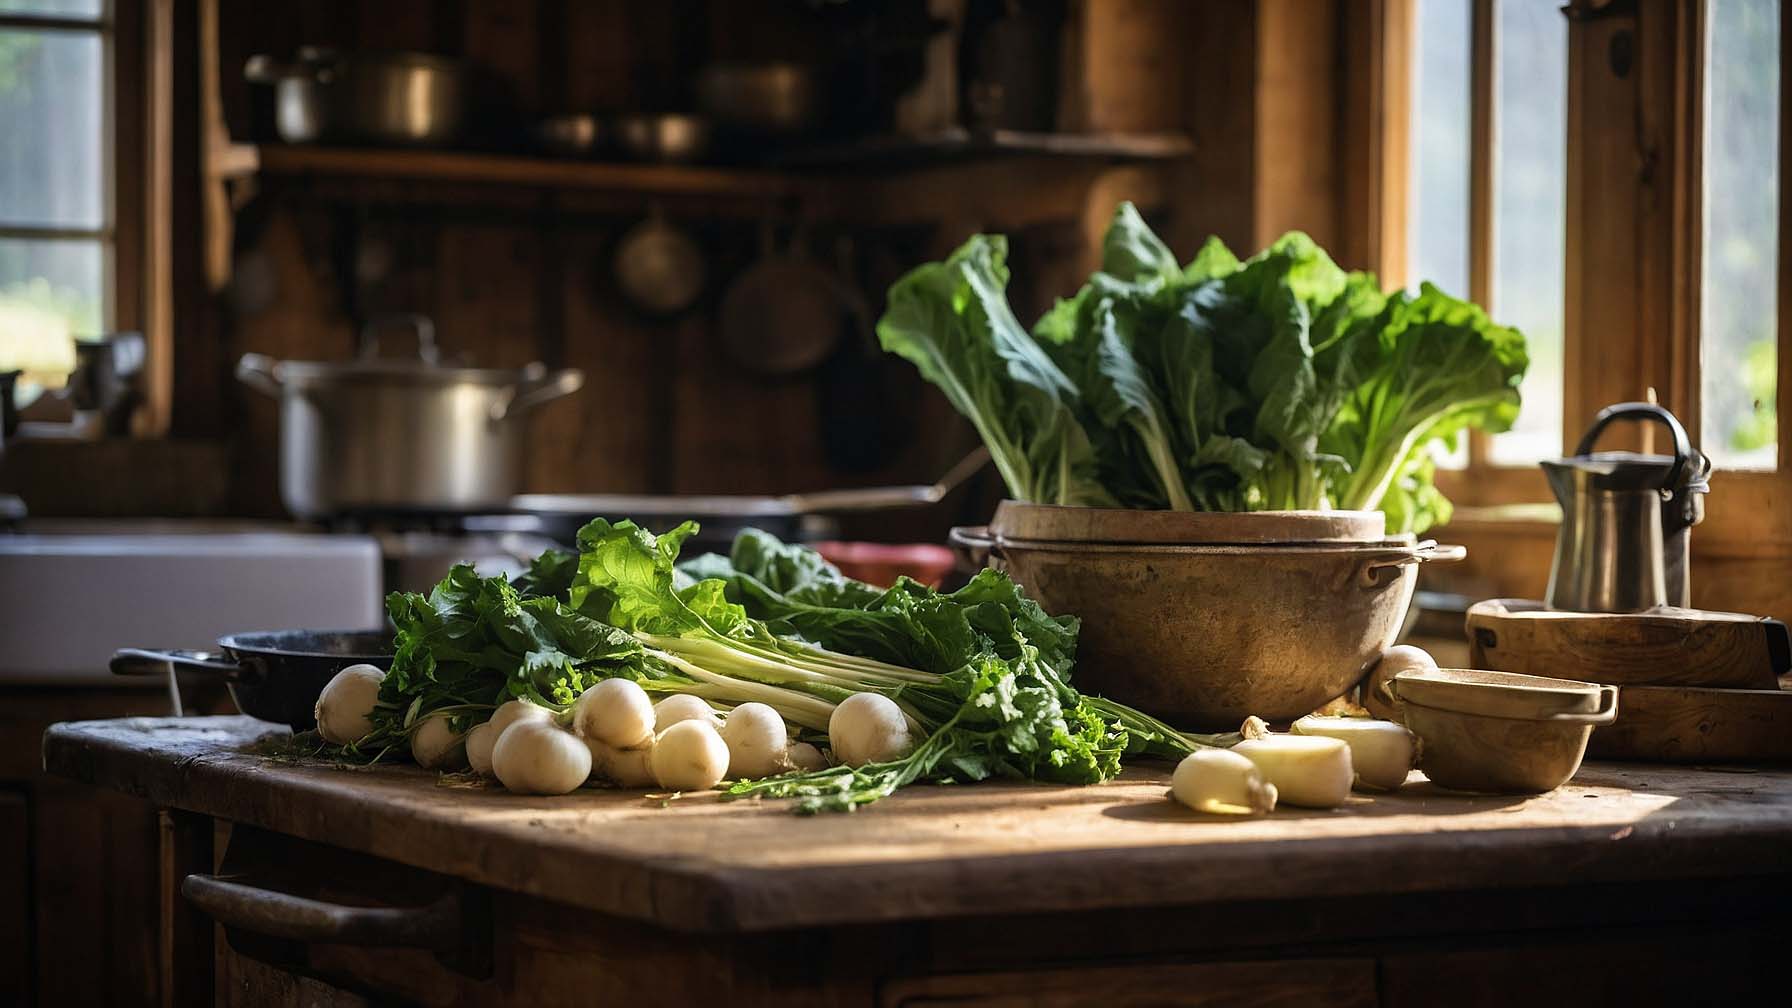 Turnips and Mustard Greens: A Harmonious Blend of Bitter and Sweet